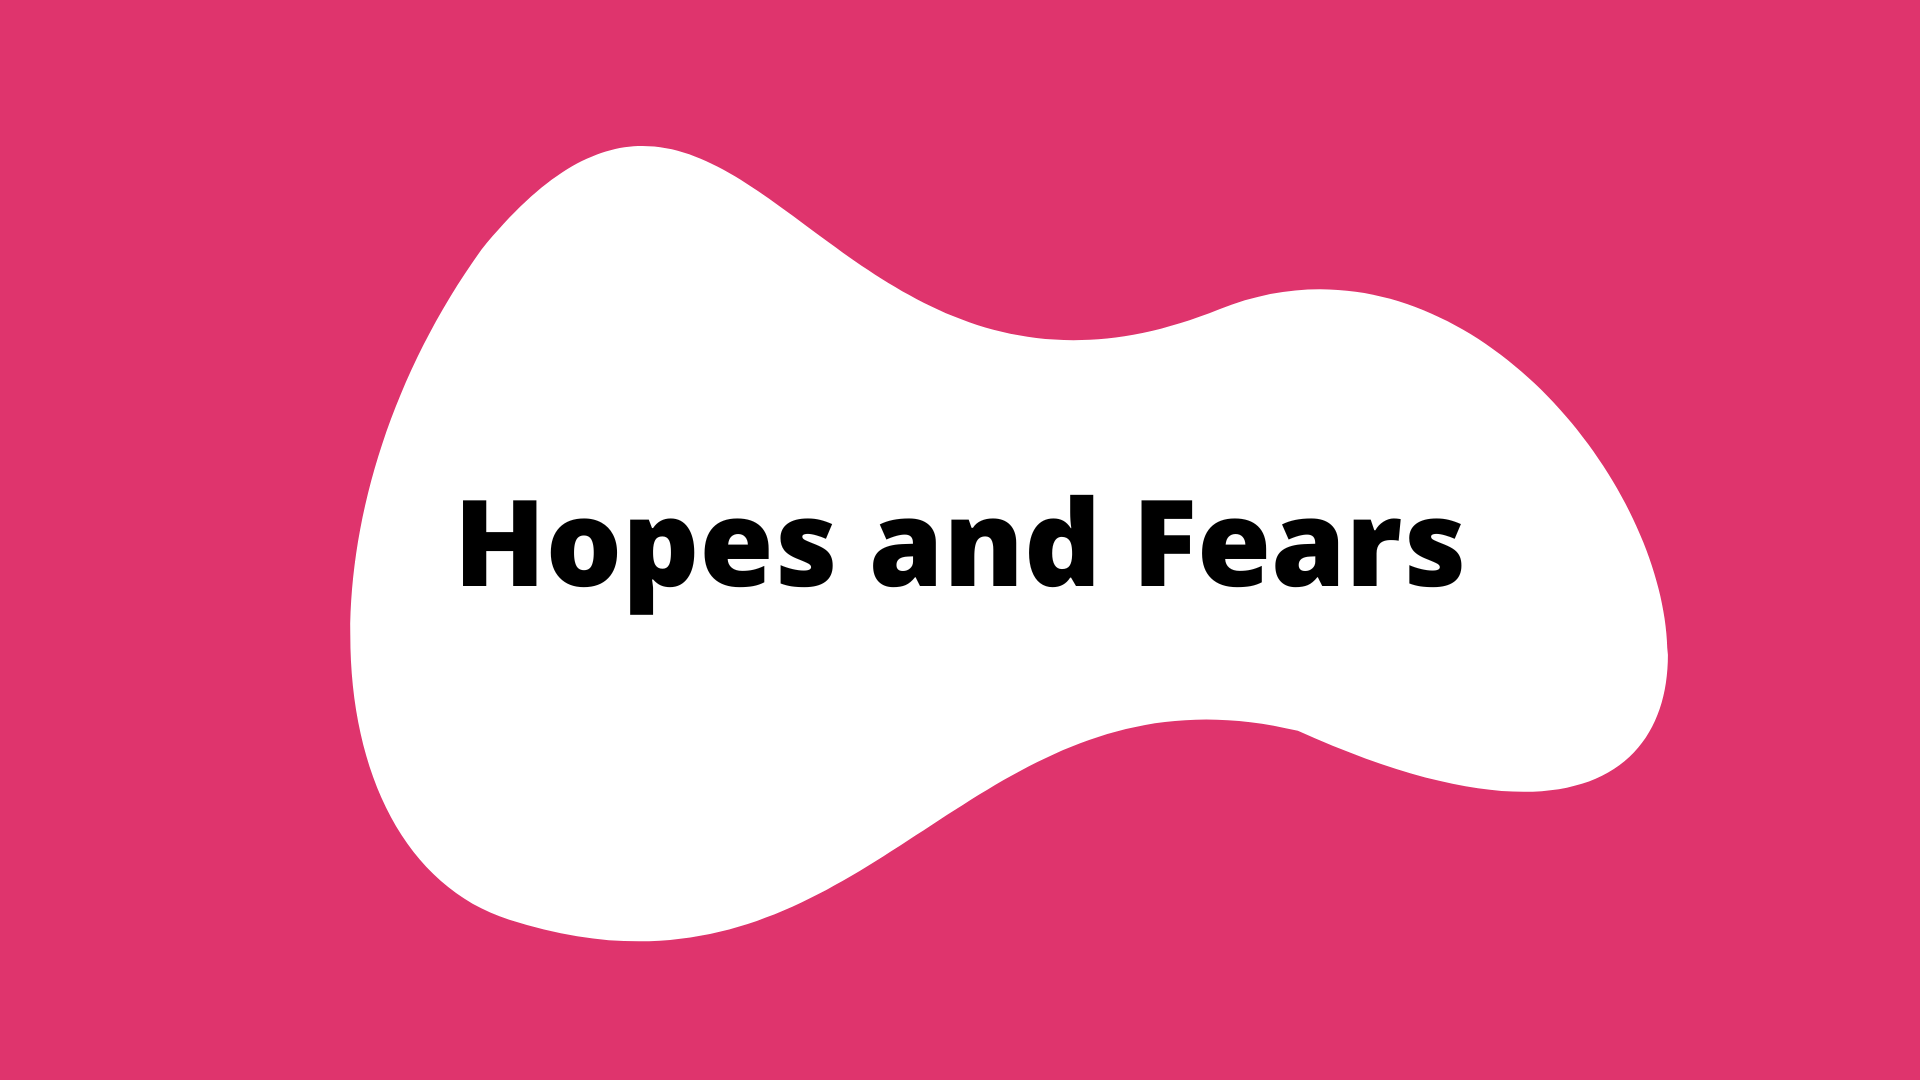 "Hopes and Fears" activity button. A pink square with a white blob in the center. The title is in the blob.